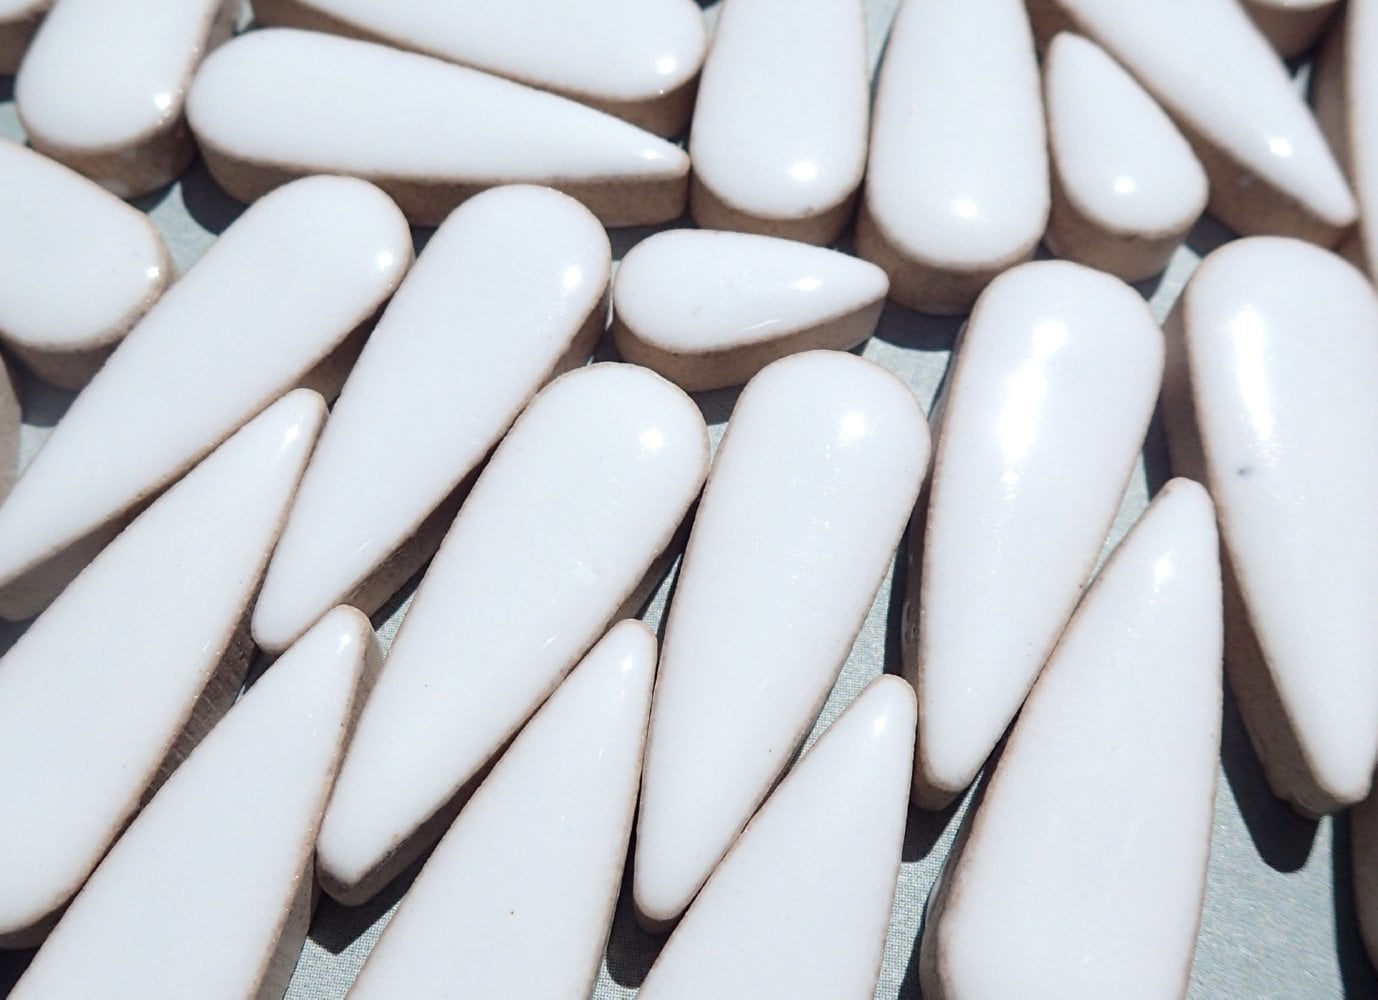 White Teardrop Mosaic Tiles - 50g Ceramic Petals in Mix of 2 Sizes 1/2" and 3/5"